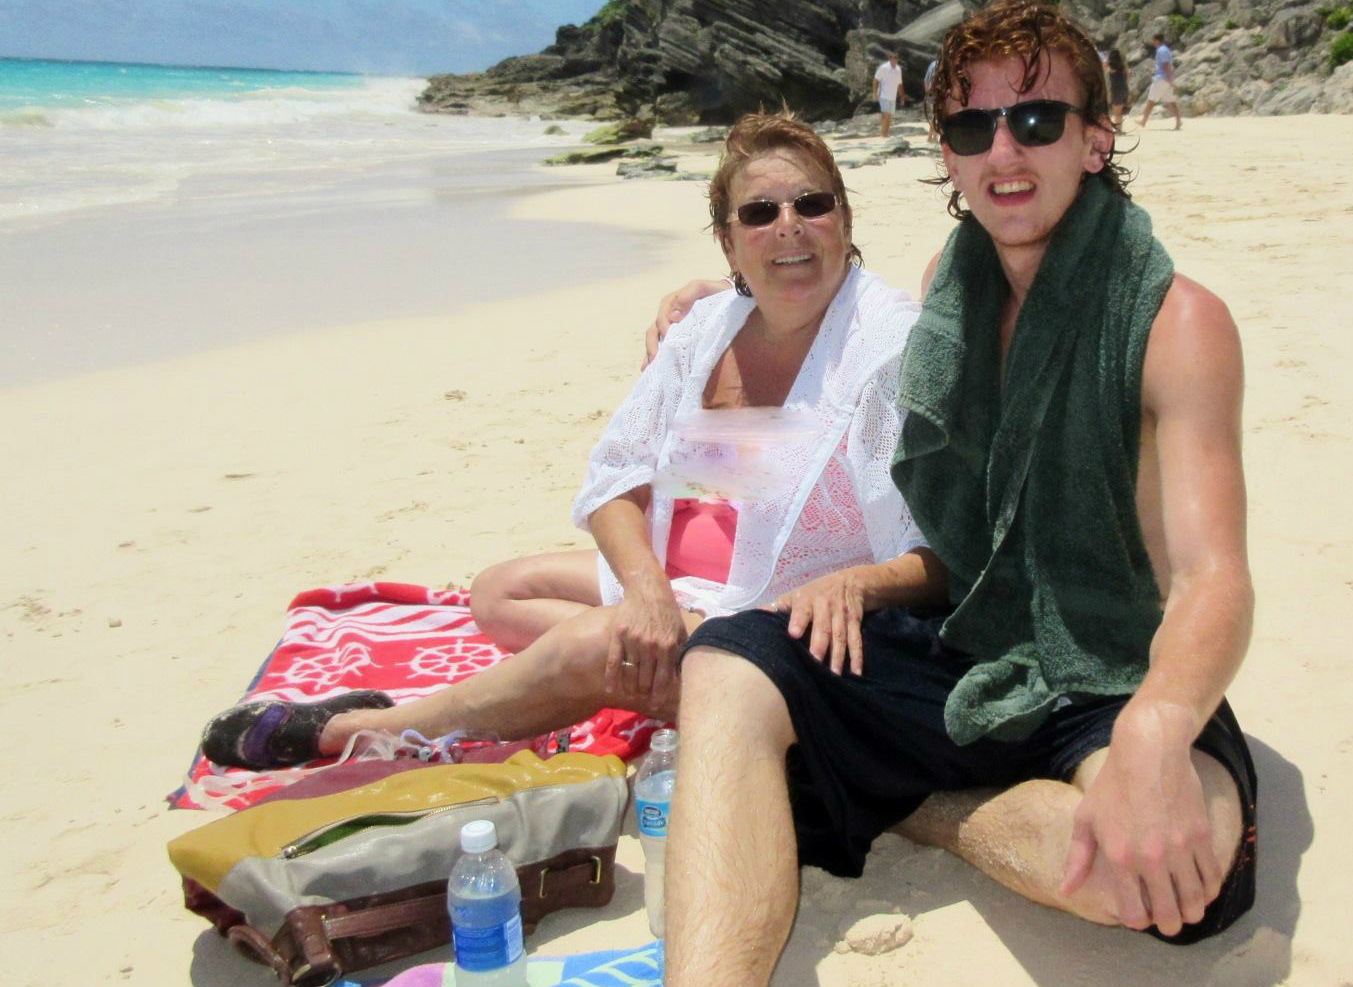 St. Andrews woman nearly drowns at Bermuda beach – Canadian hero saves her life